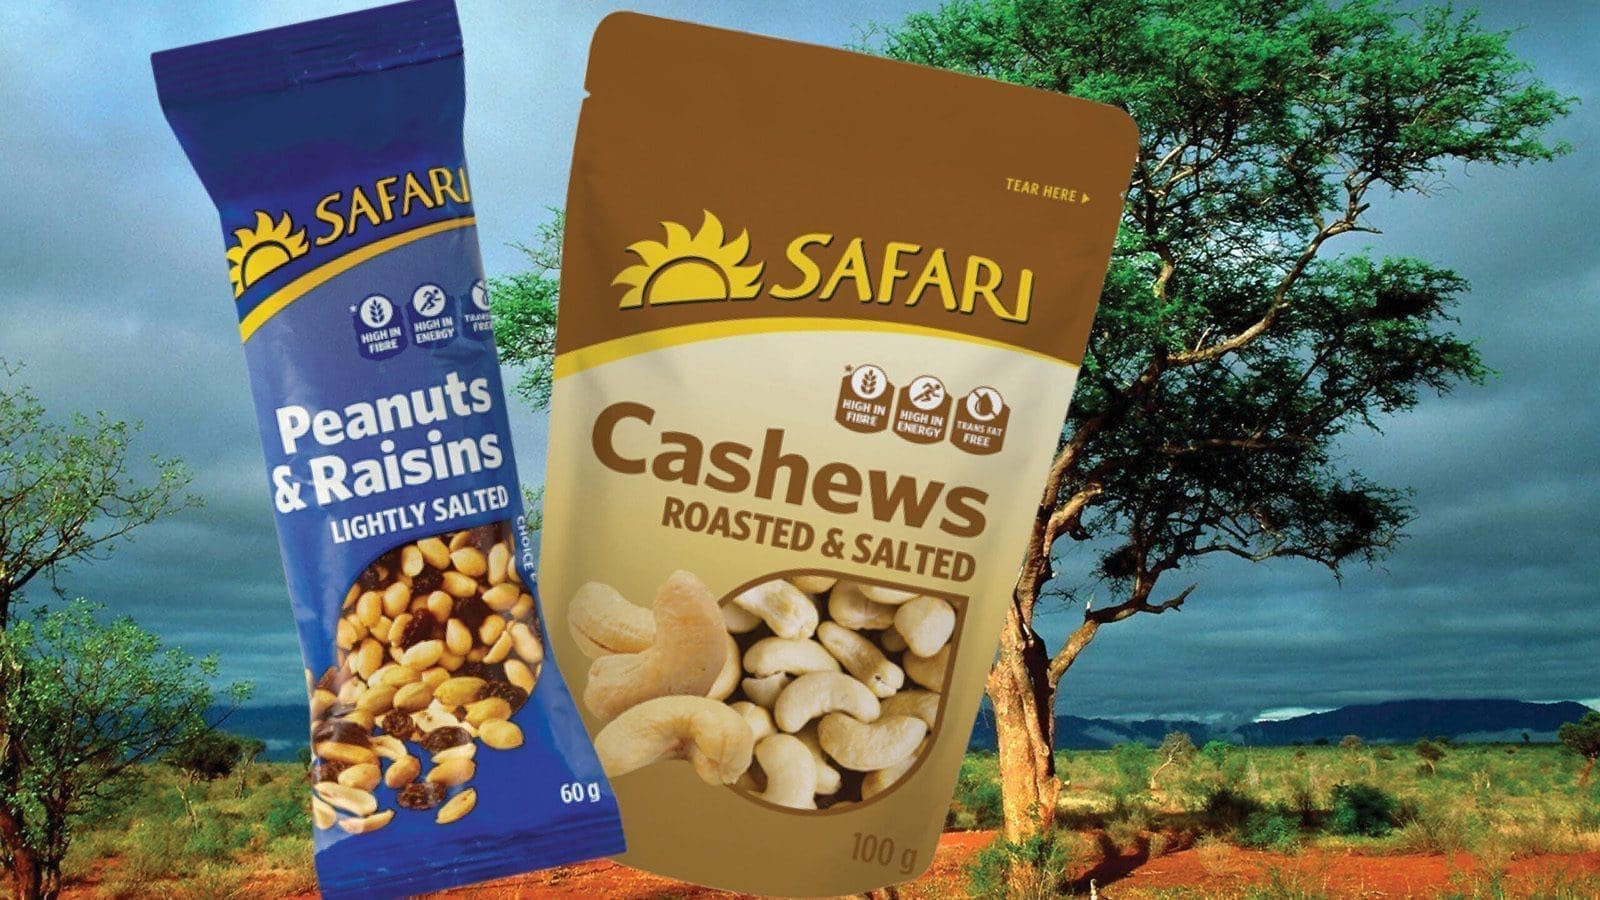 Pioneer Foods detects Salmonella in its Safari brands products, recalls products